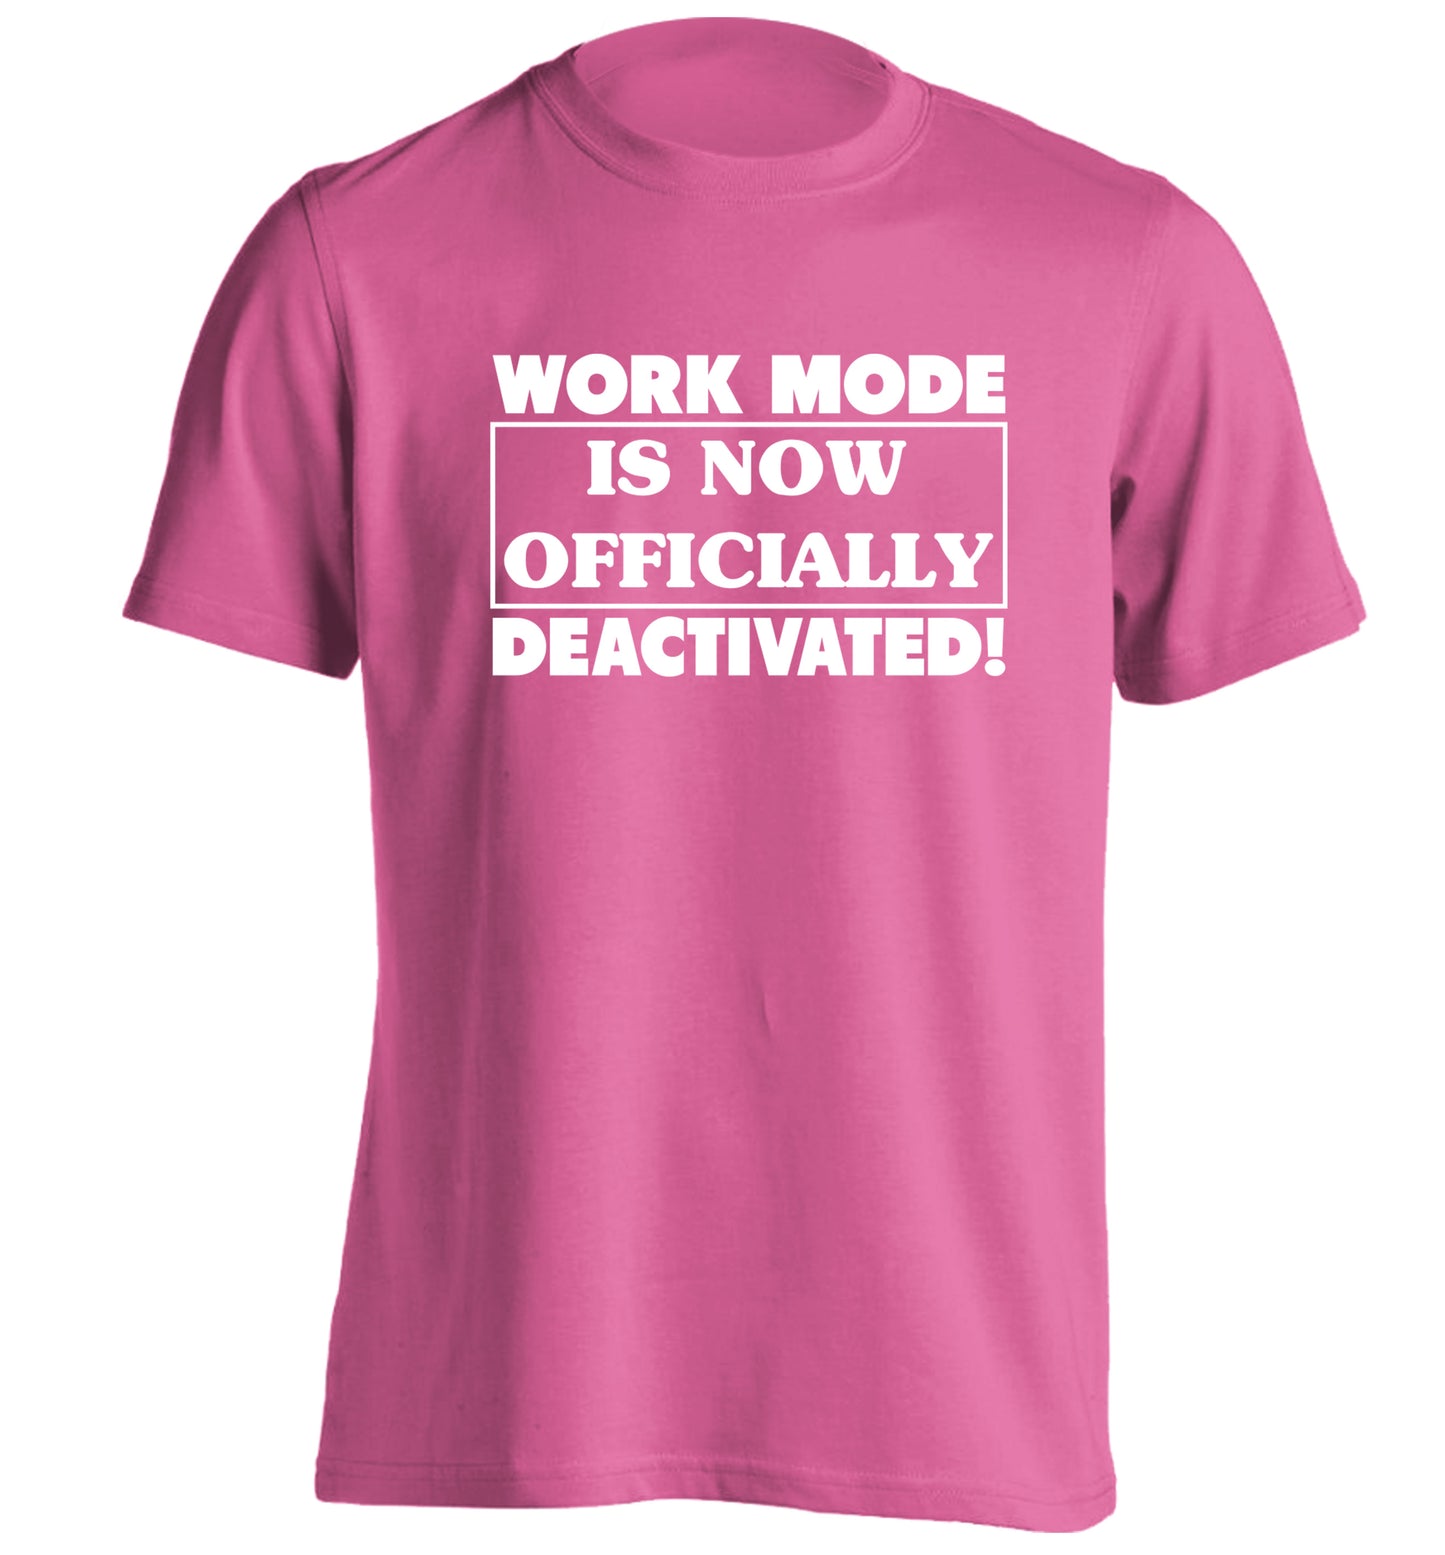 Work mode is now officially deactivated adults unisex pink Tshirt 2XL